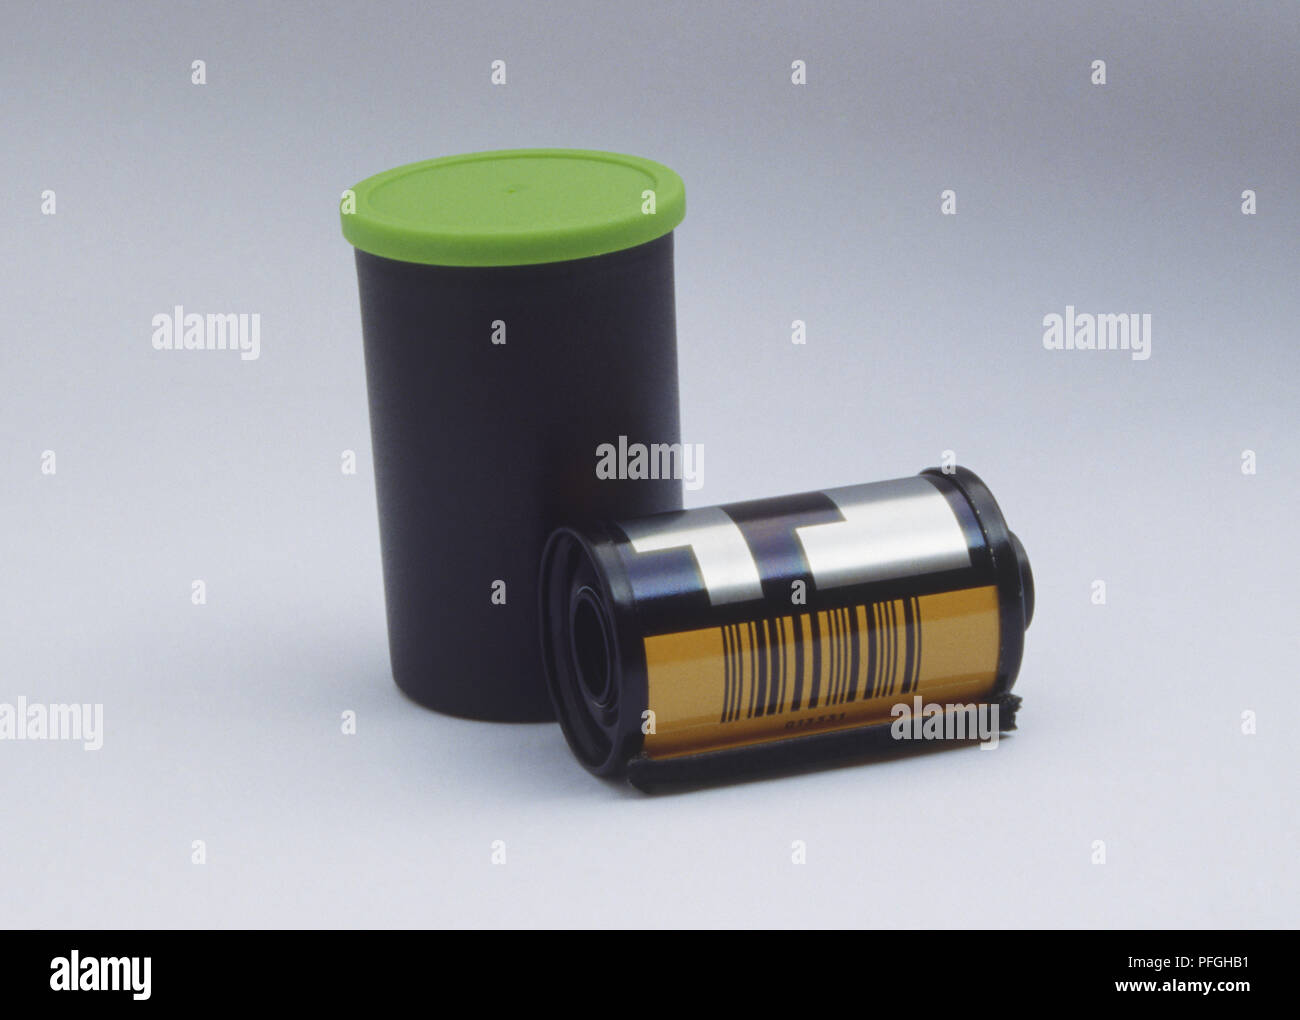 A film cassette and a light-tight container that has a green lid. A used film be placed into a light-tight container Stock Photo - Alamy